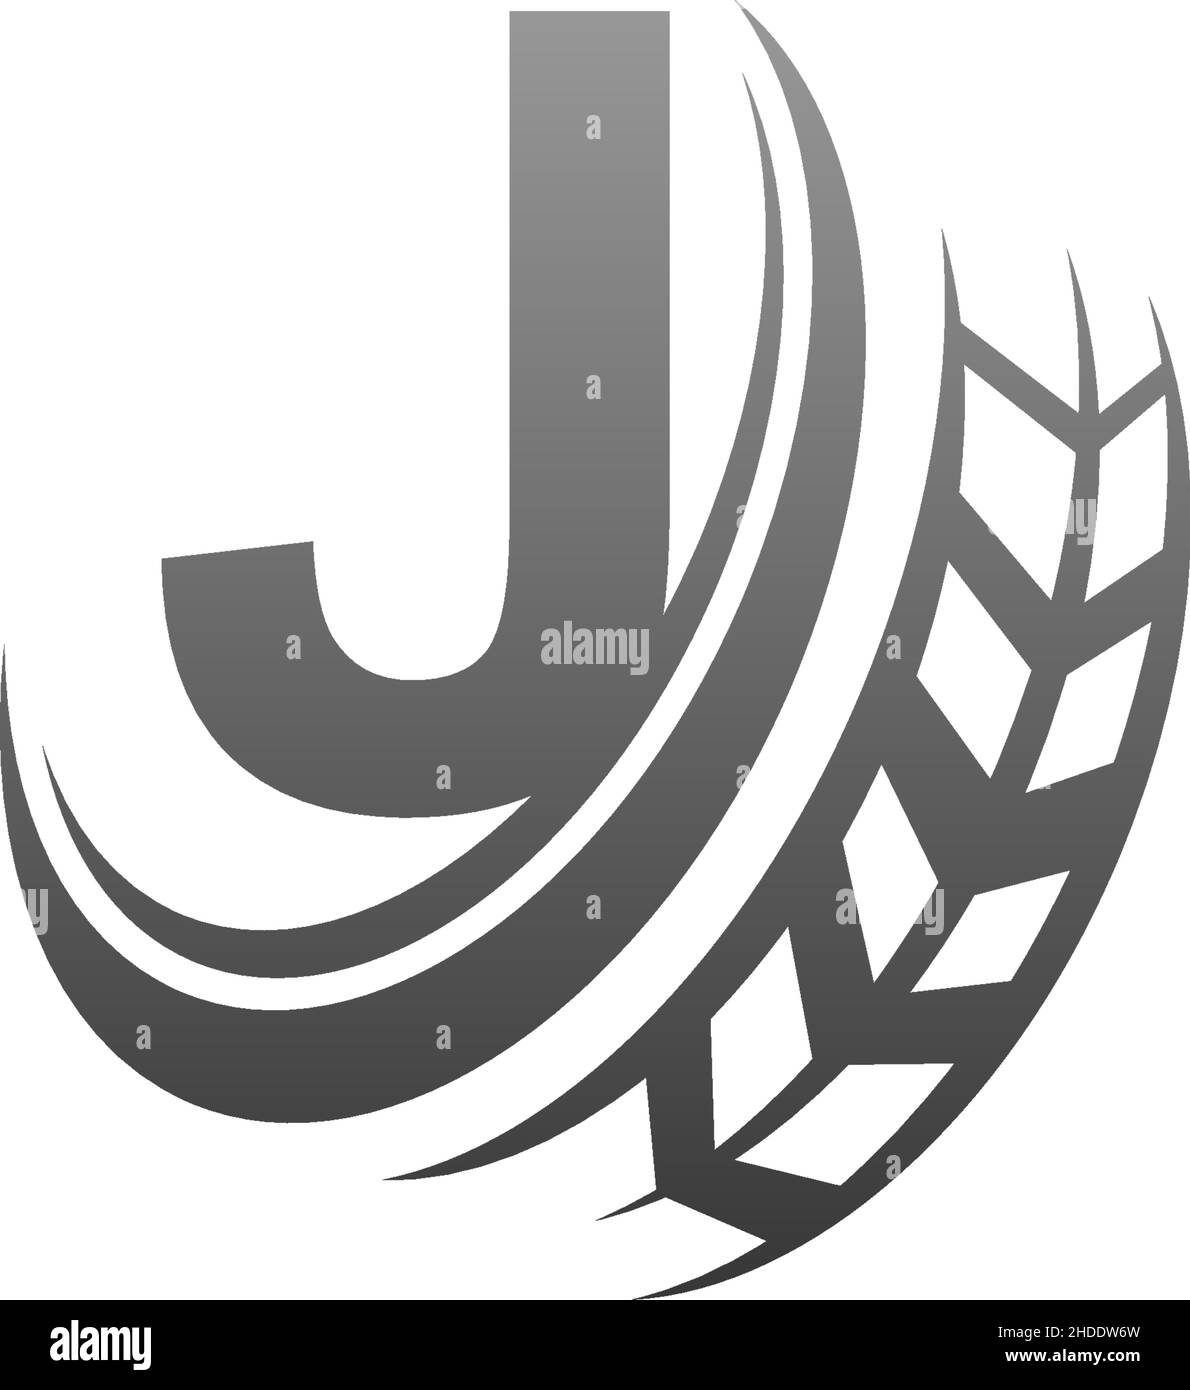 Letter J with trailing wheel icon design template illustration vector Stock Vector